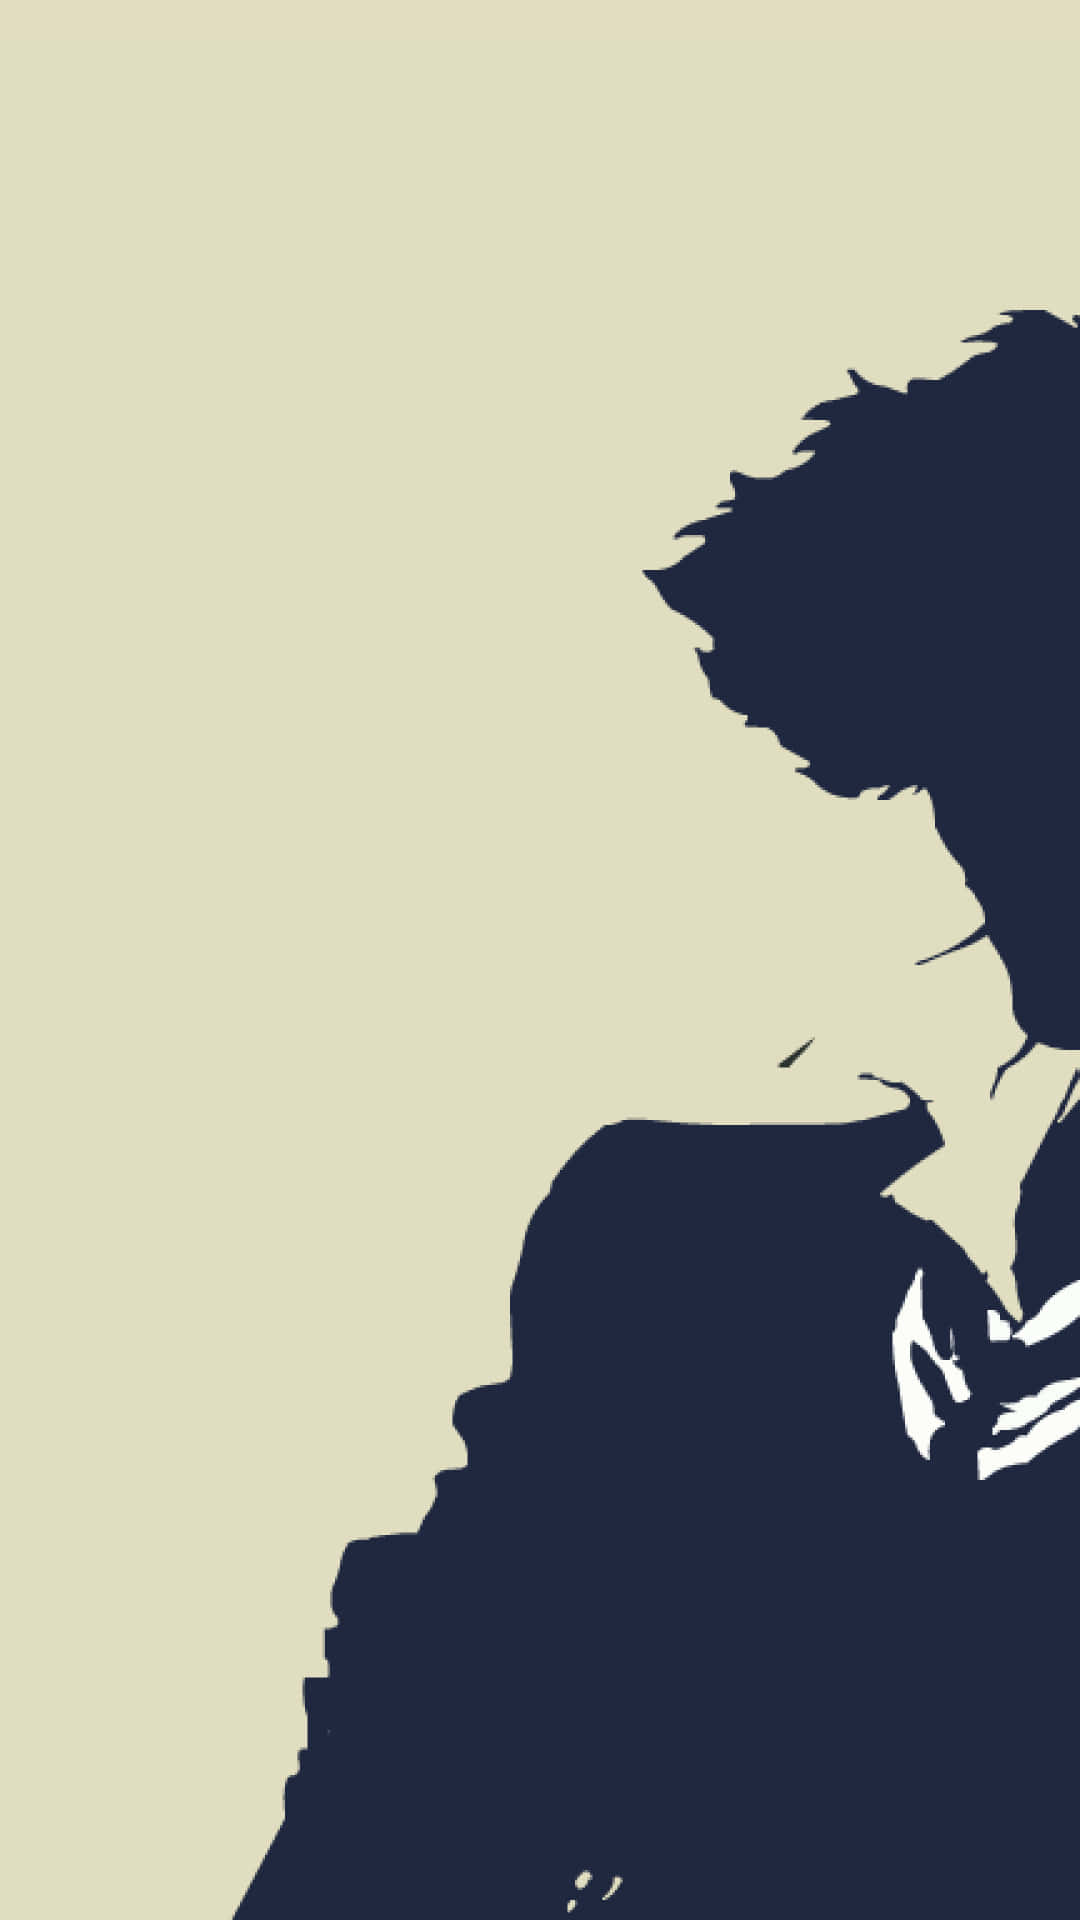 Feel the freedom on the open road with Cowboy Bebop on your Iphone Wallpaper